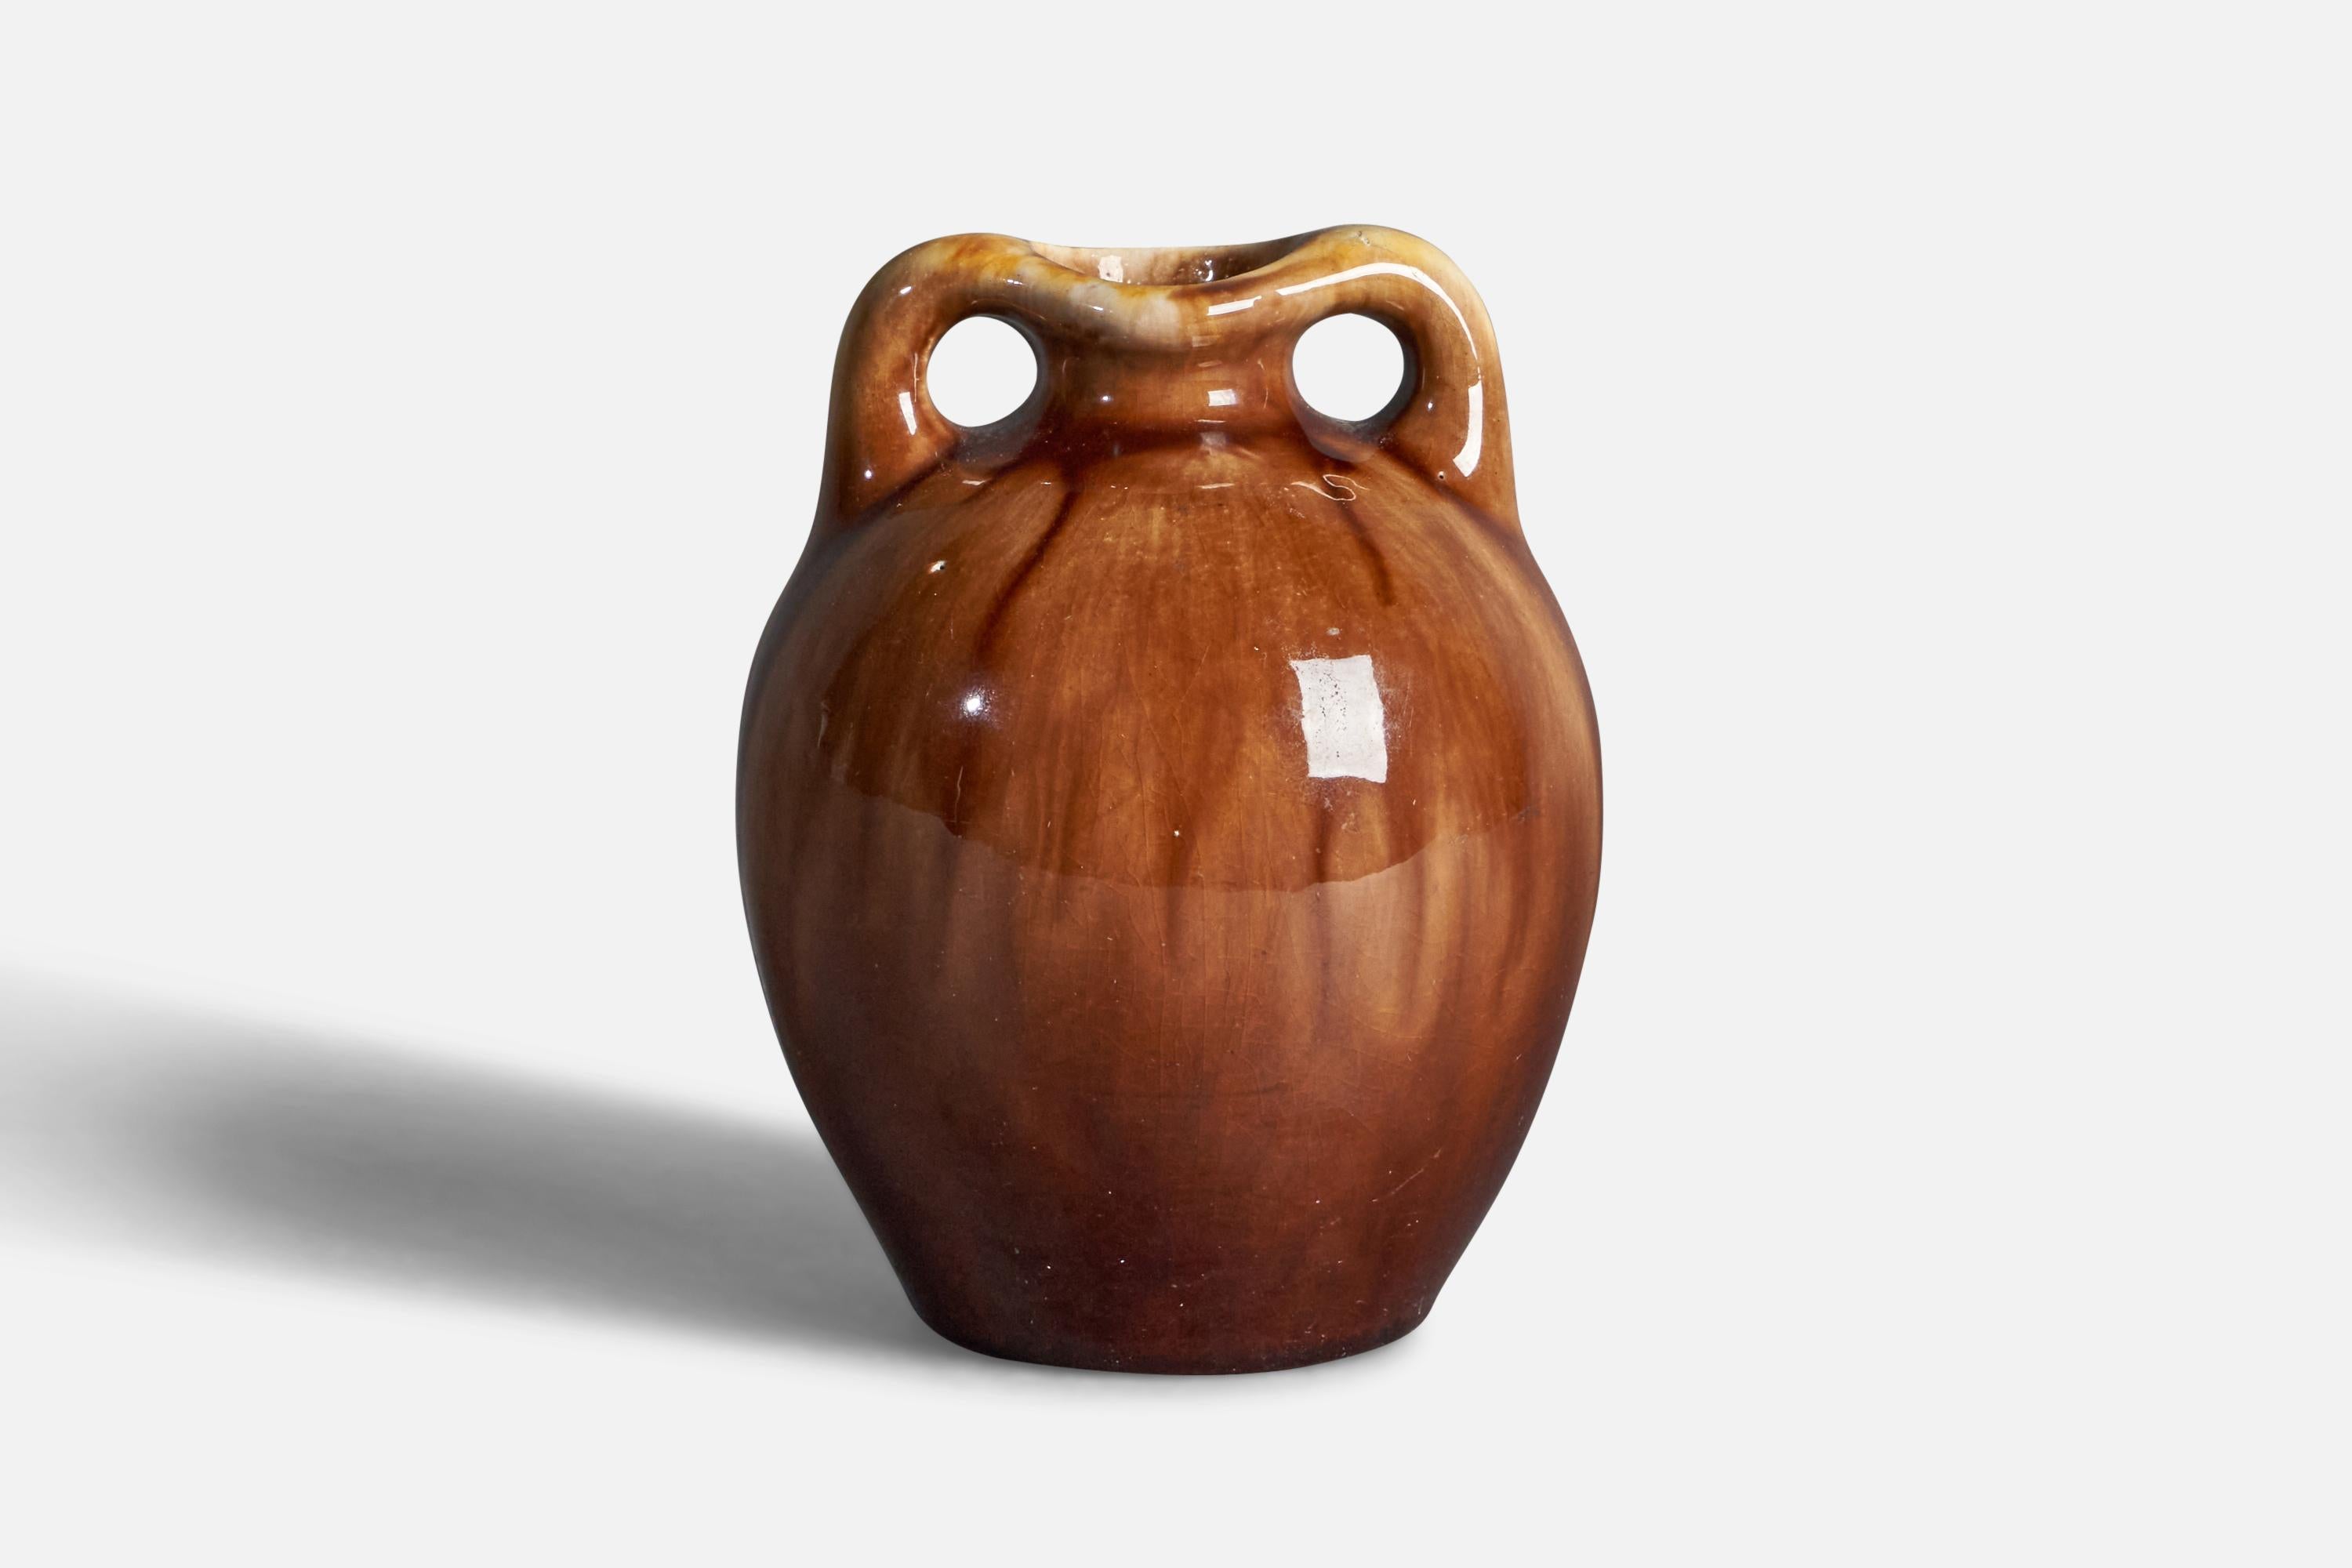 A brown-glazed vase designed and produced in Finland, c. 1920s.